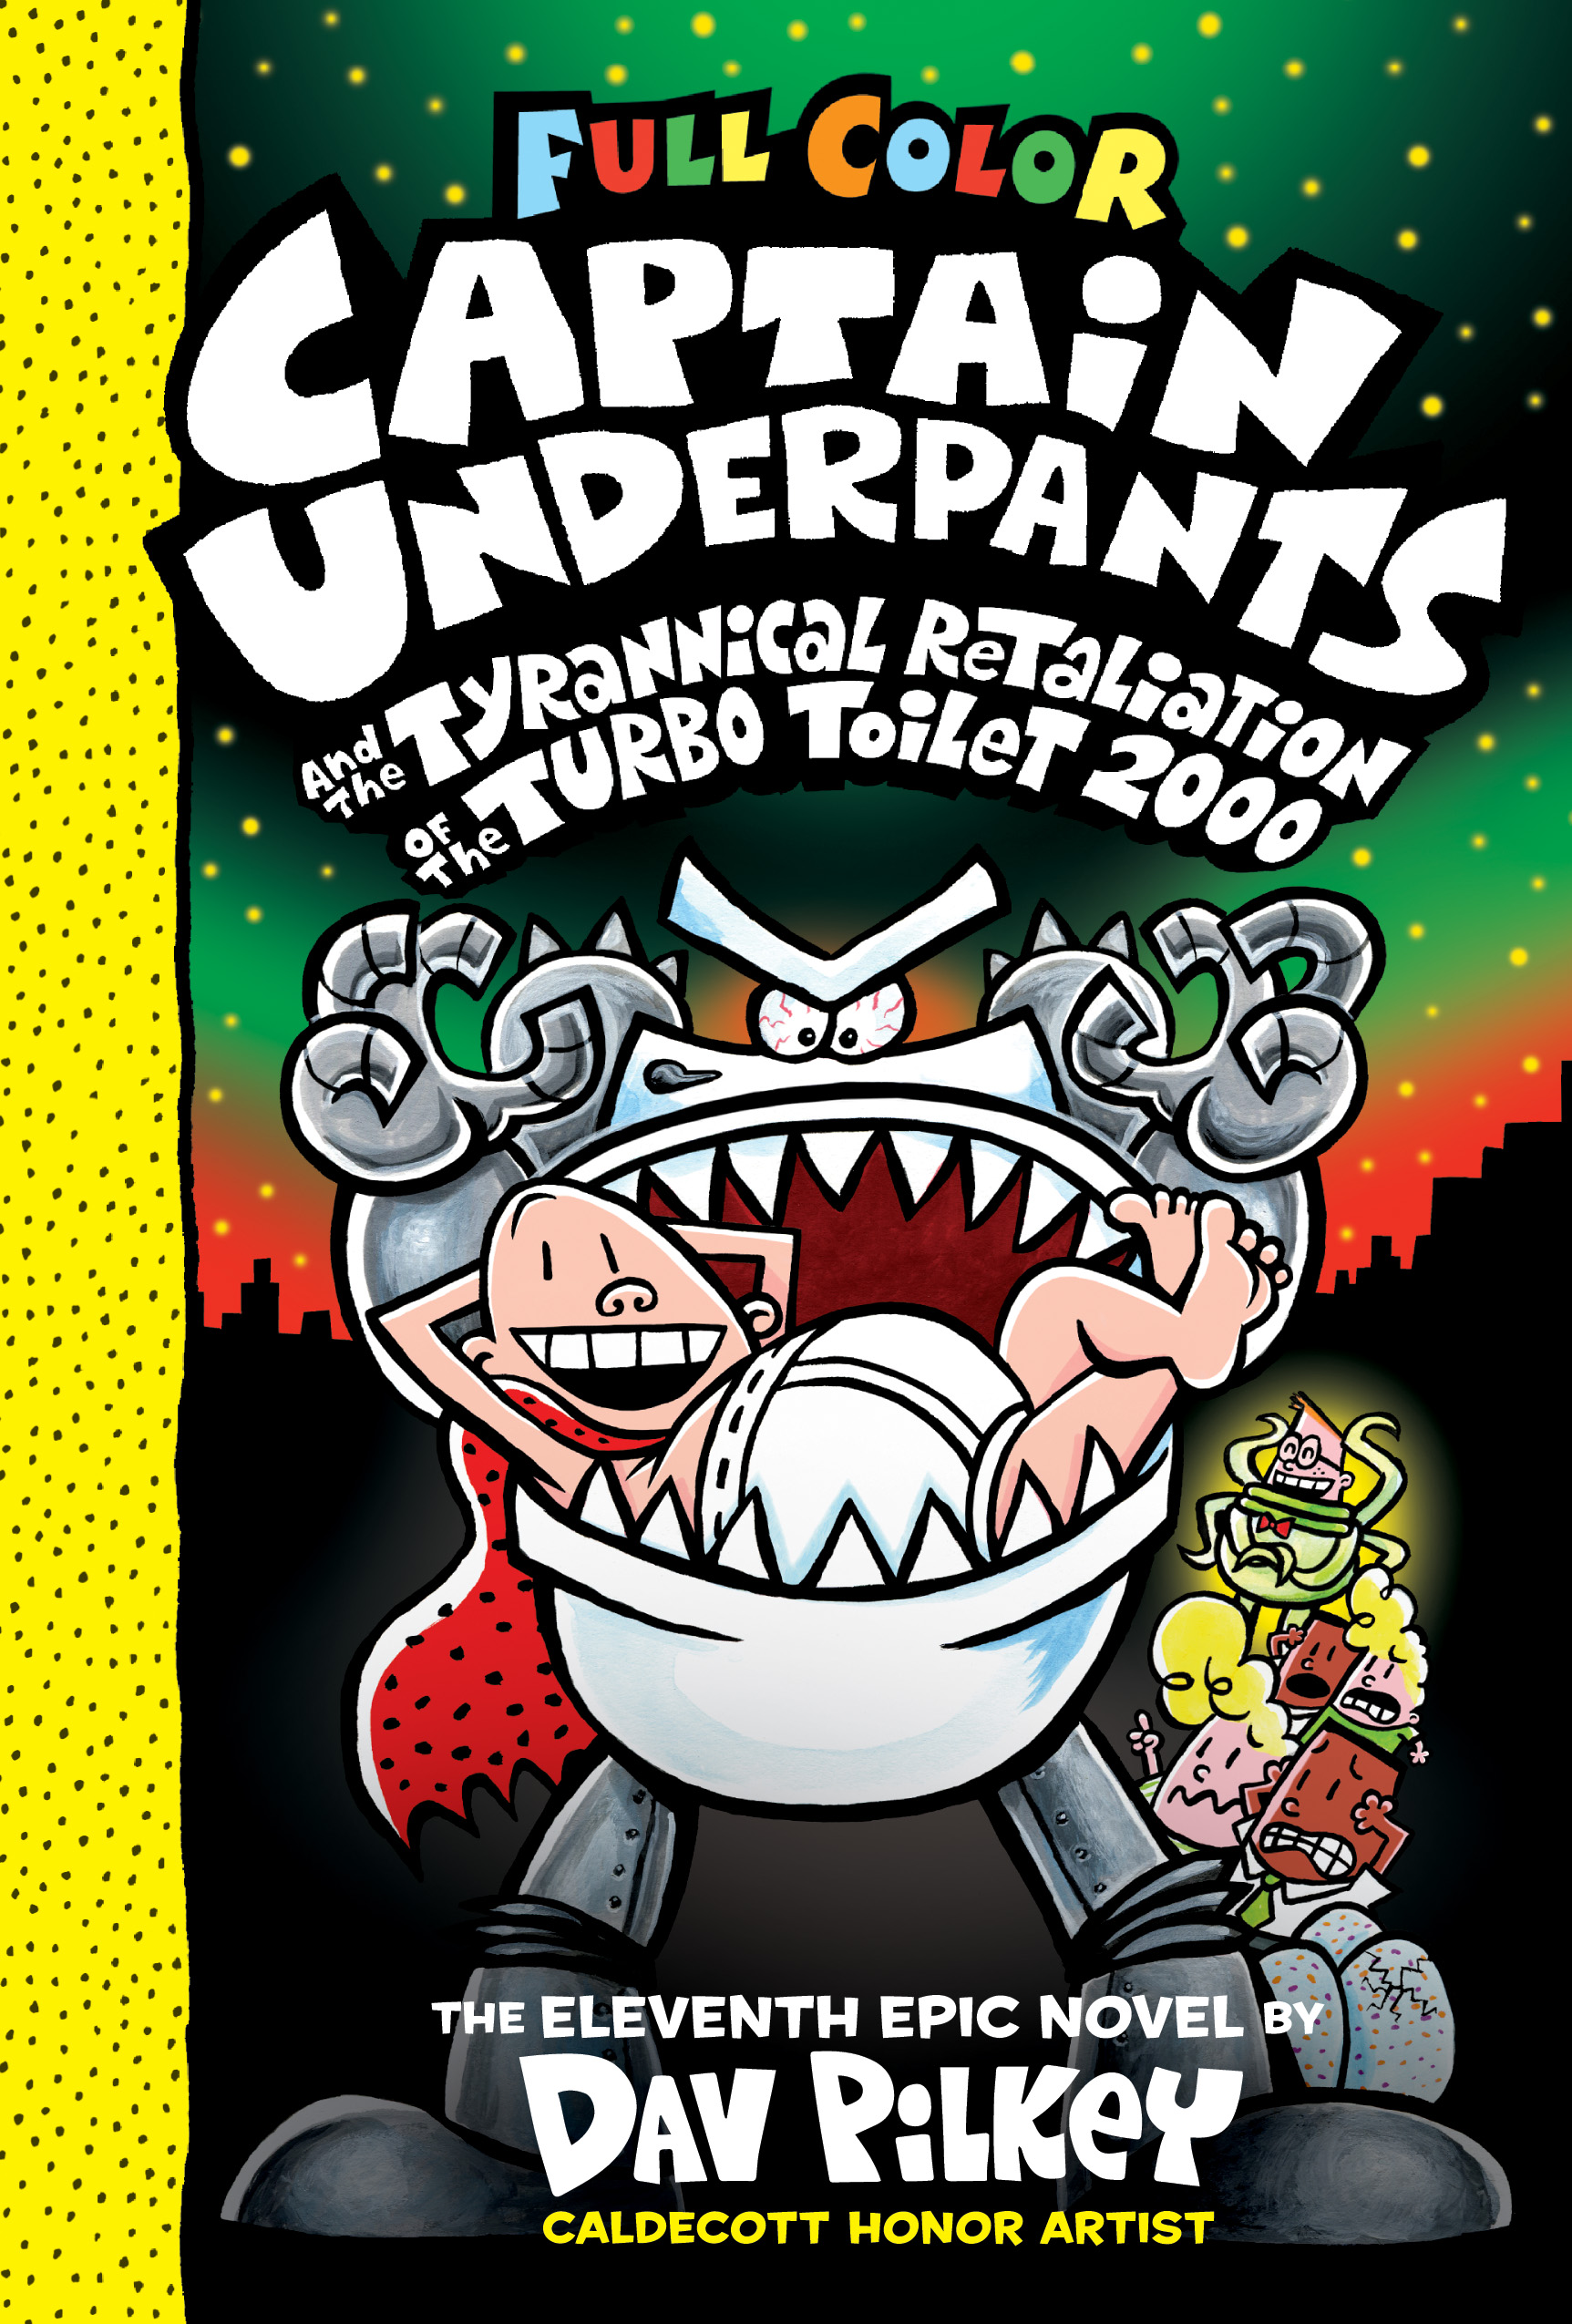 Captain Underpants and the Tyrannical Retaliation of the Turbo Toilet 2000: Color Edition (Captain Underpants #11) (Color Edition) cover image